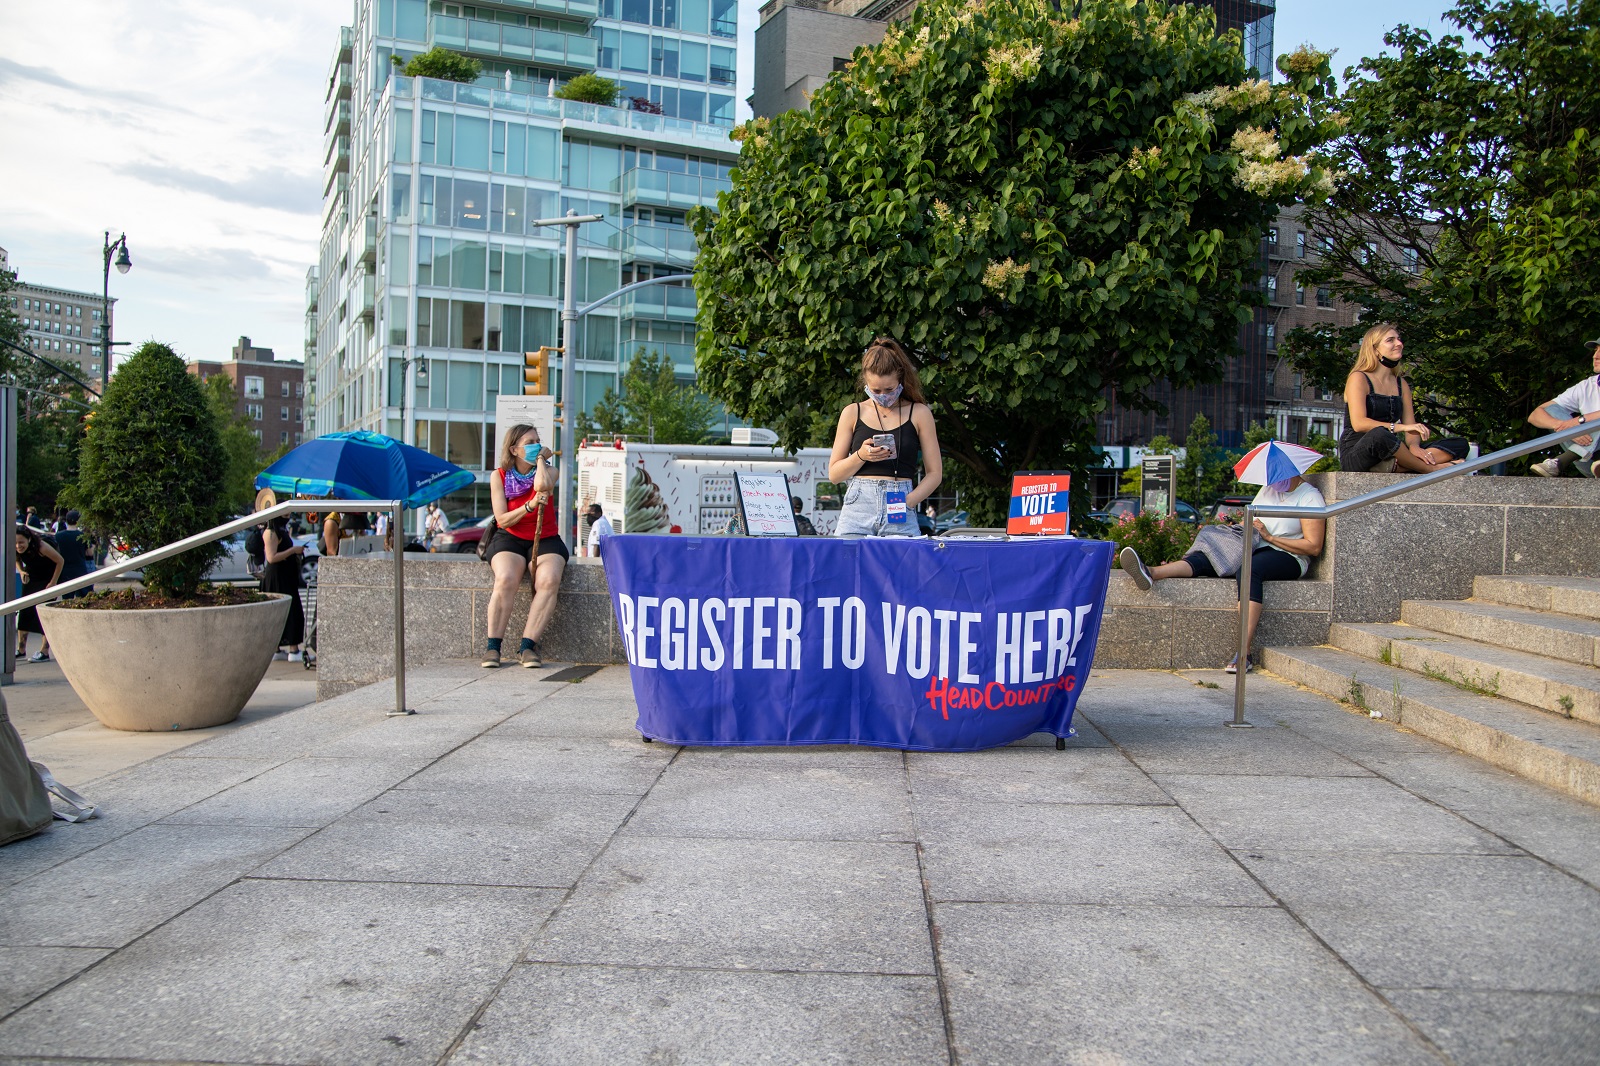 An image of a woman standing over a table to register people to vote.